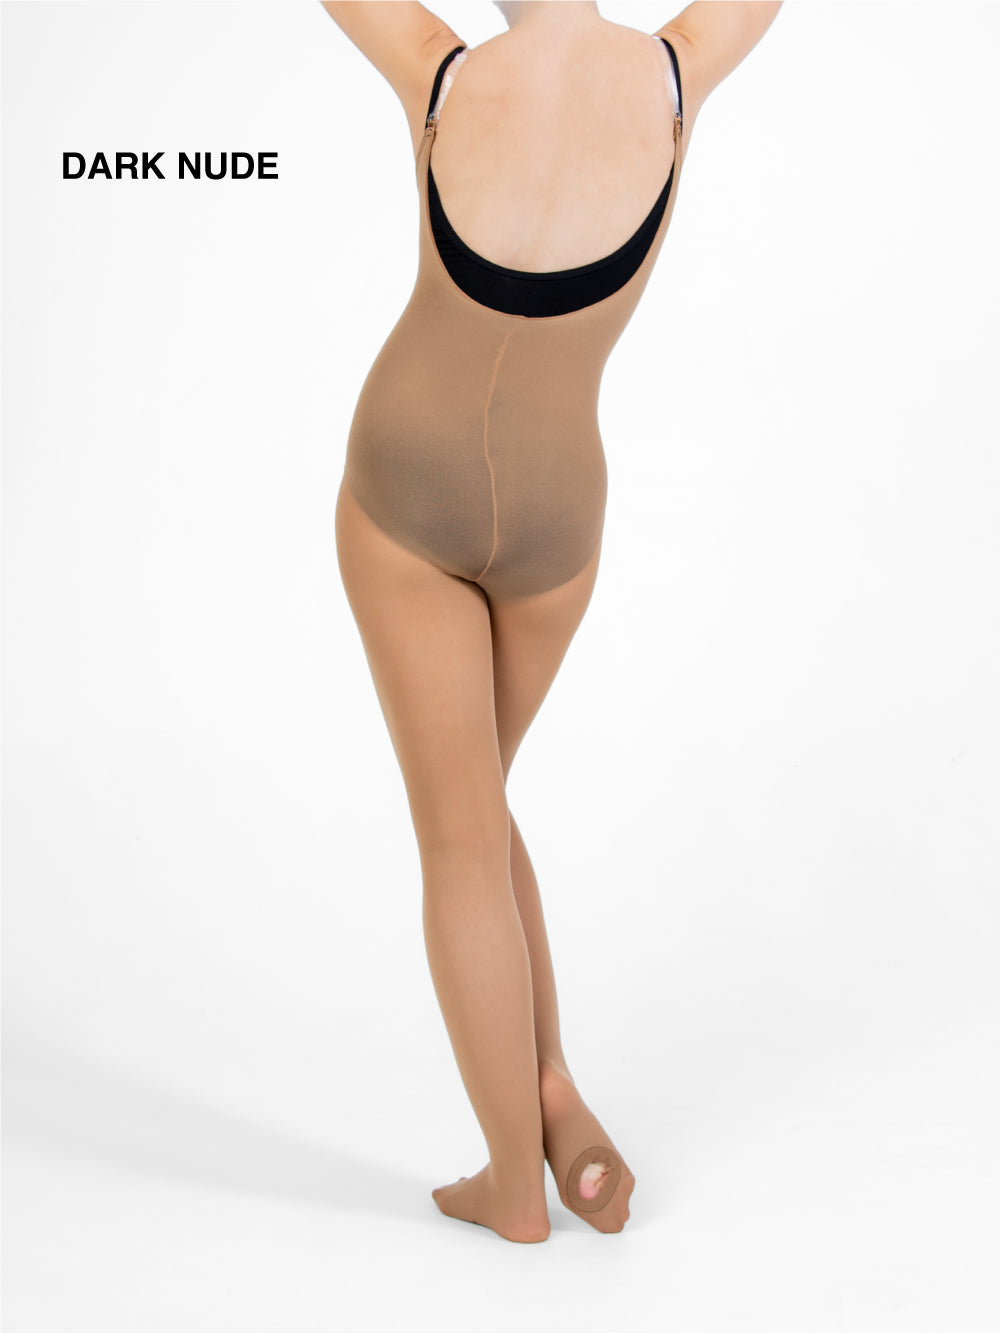 Adult TotalSTRETCH Footed Dance Tights by Body Wrappers